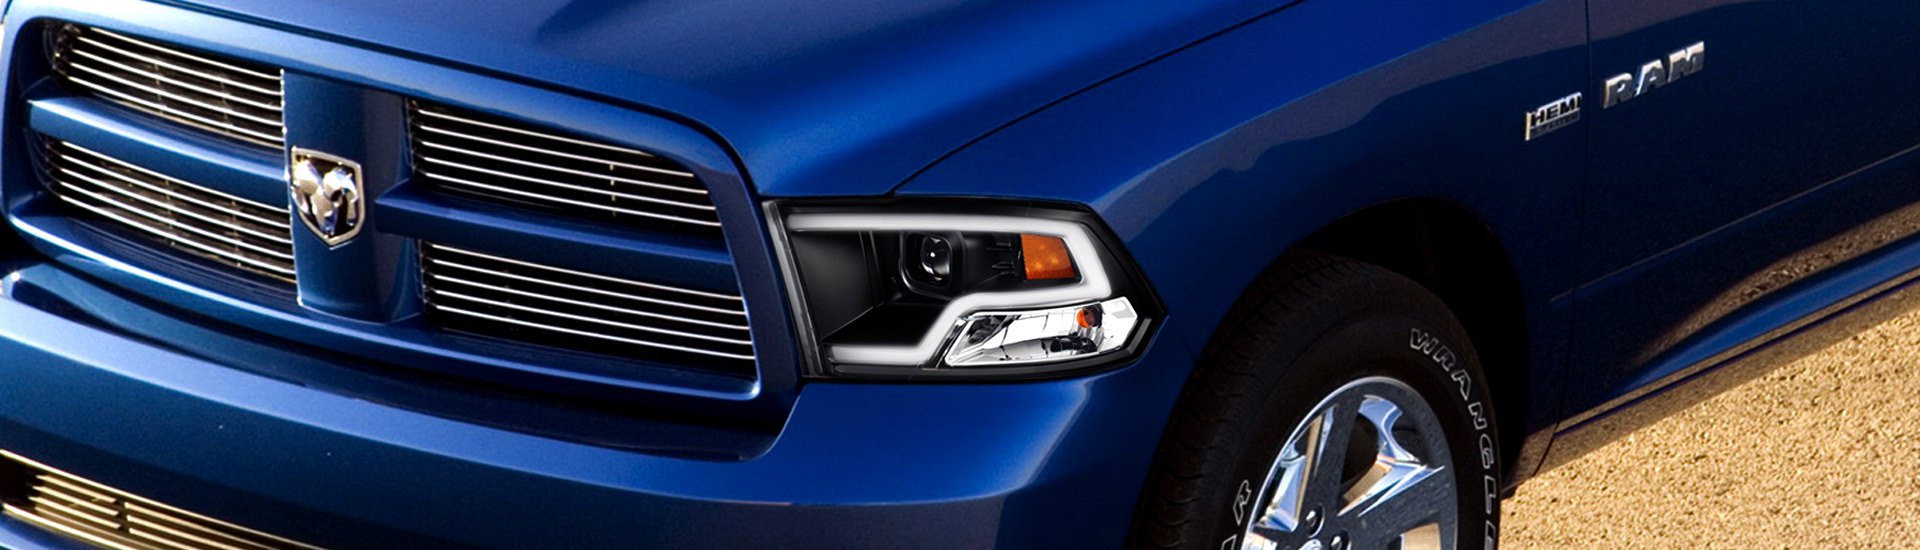 Revamp The Look Of Your Ram With New Anzo LED Headlights